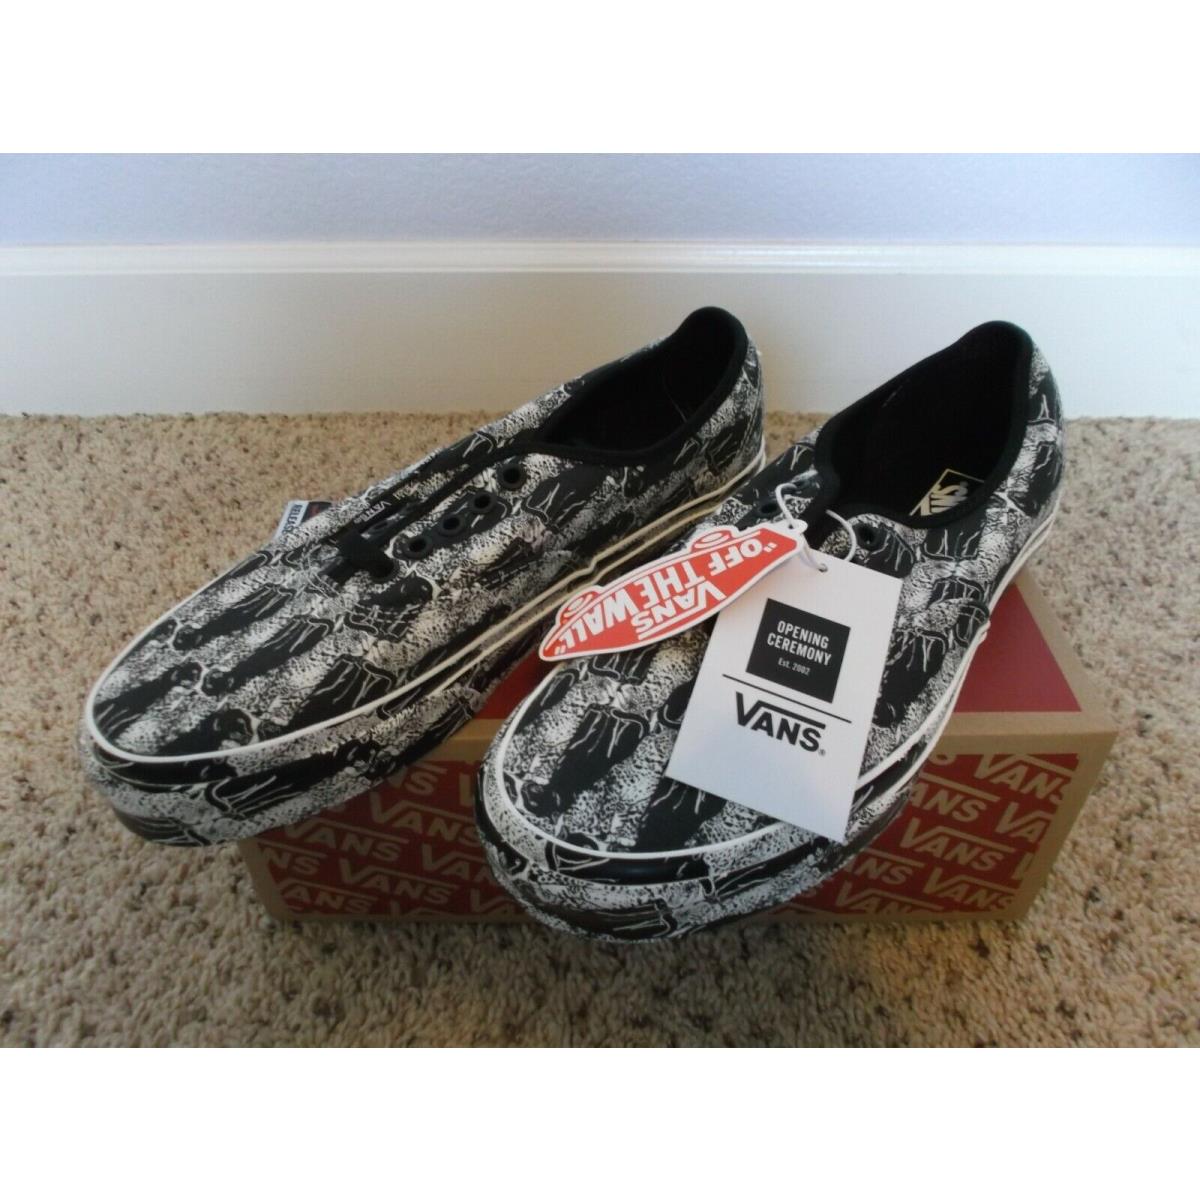 Vans x Opening Ceremony Lifestyle Men`s Size 9 - VN0A348A43M